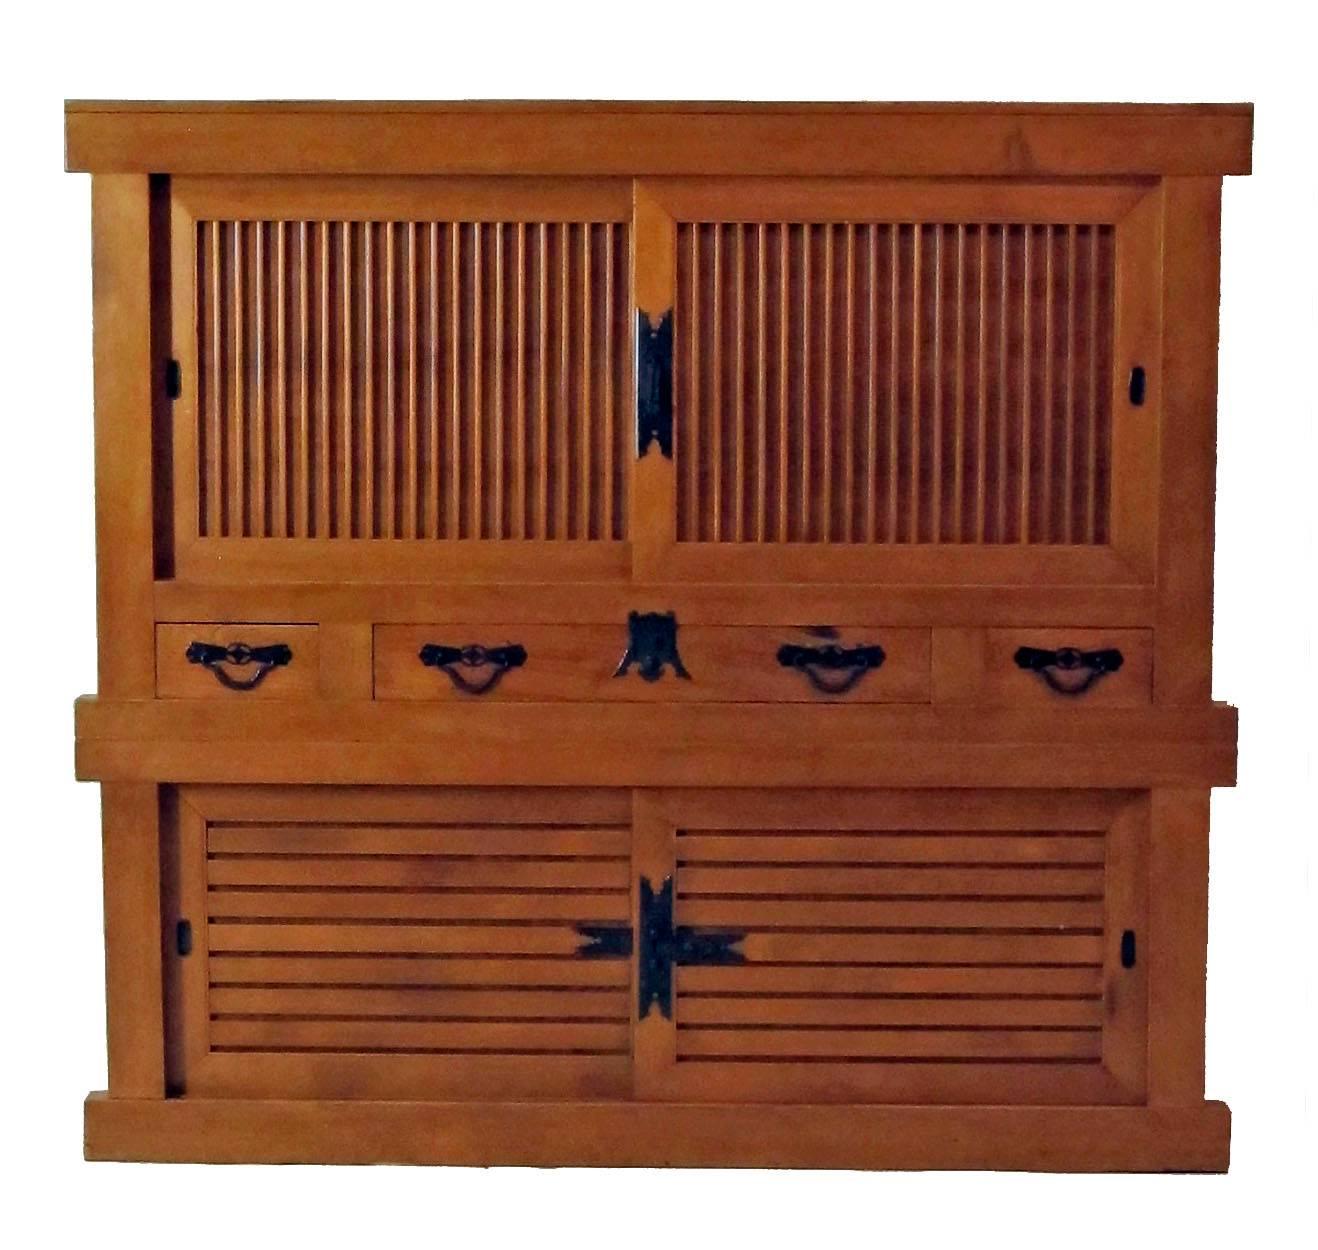 A two section cypress wood futon tansu with original steel hardware in remarkable restored condition. The interior depth of this cabinet measures 23 inches. Japan, Meiji period, late 19th-early 20th century.